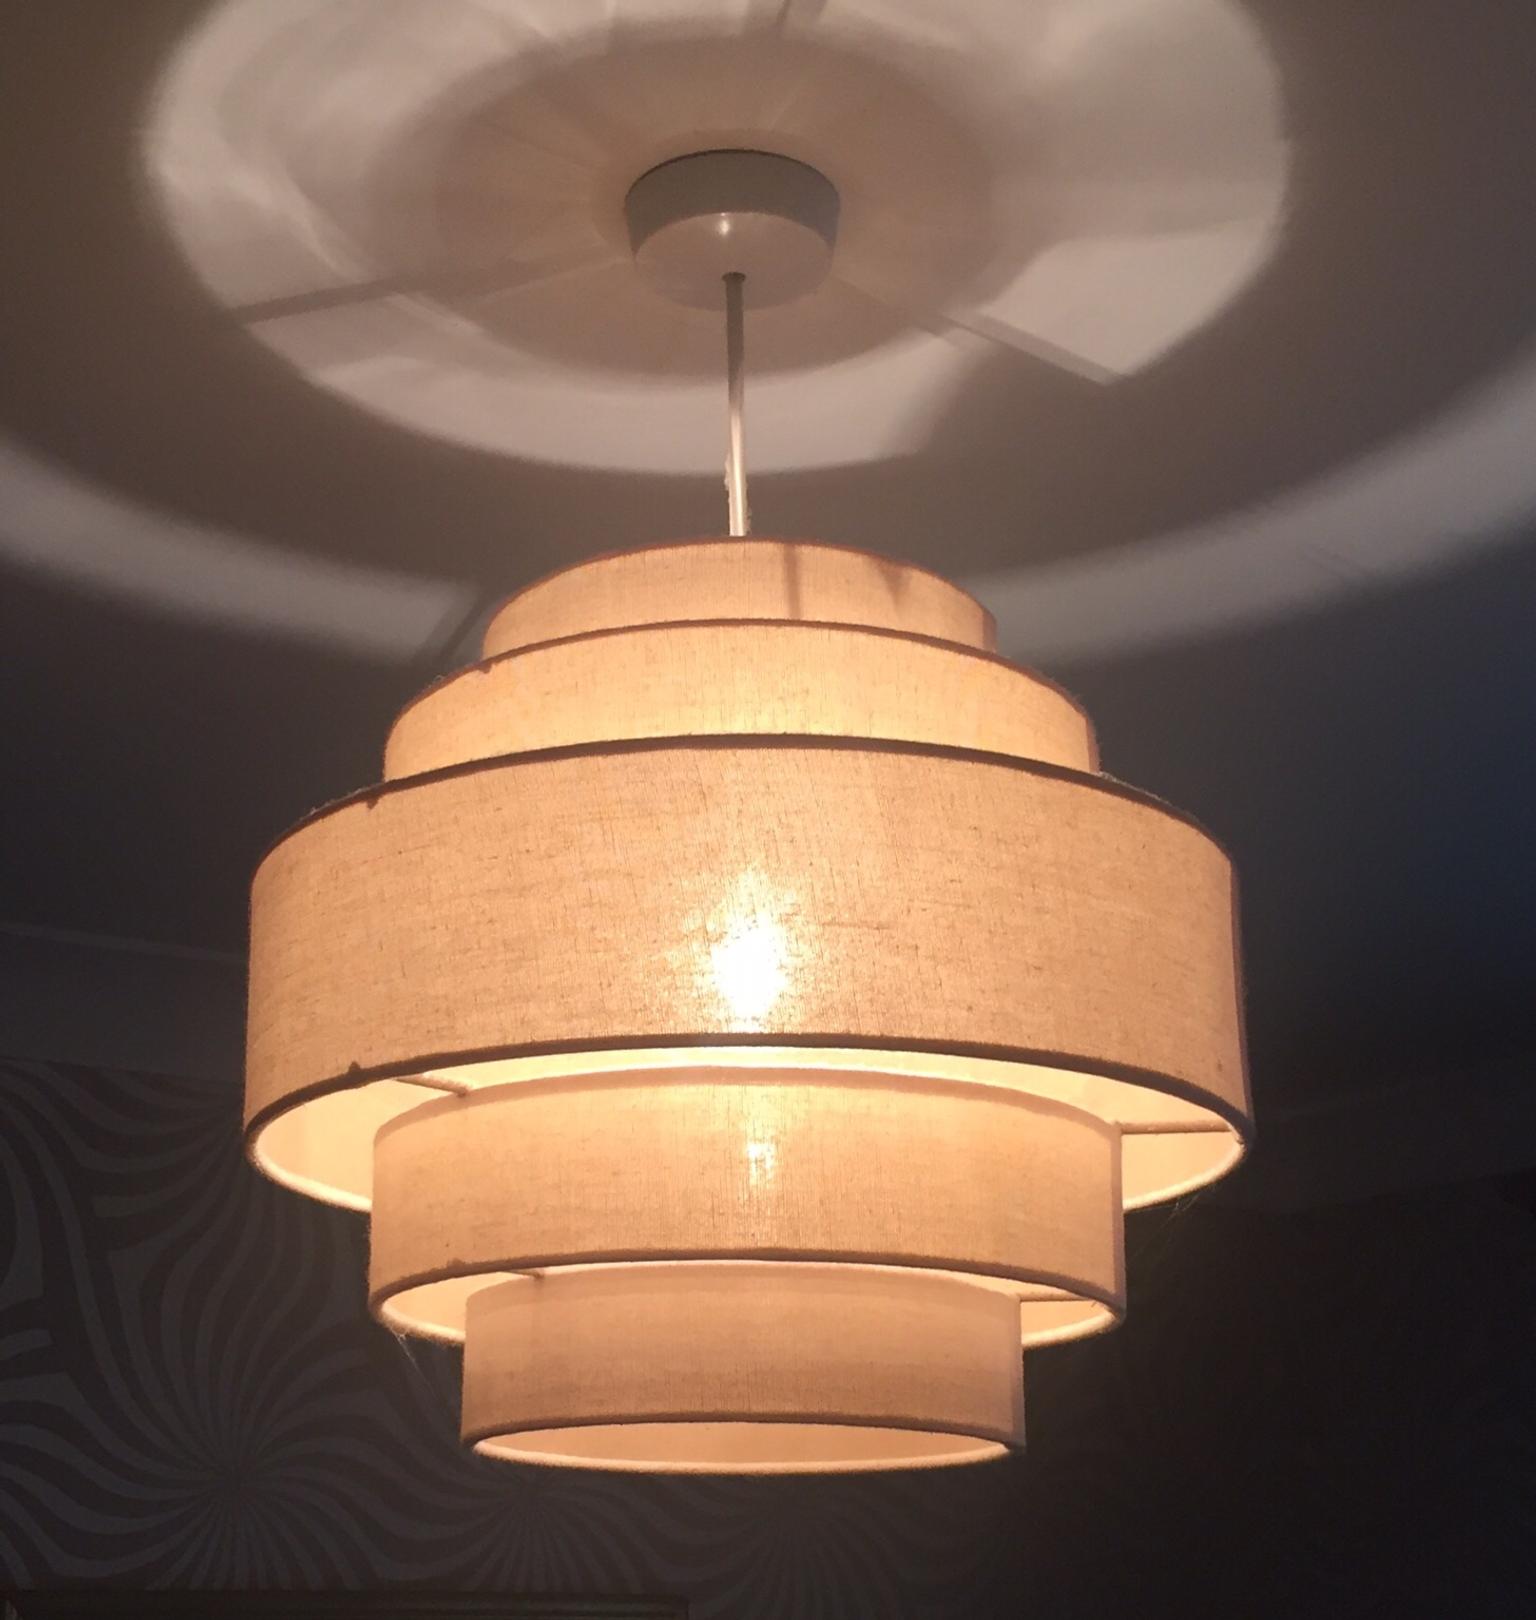 Ceiling Light Shade By Marks And Spencer In Ta19 Somerset For